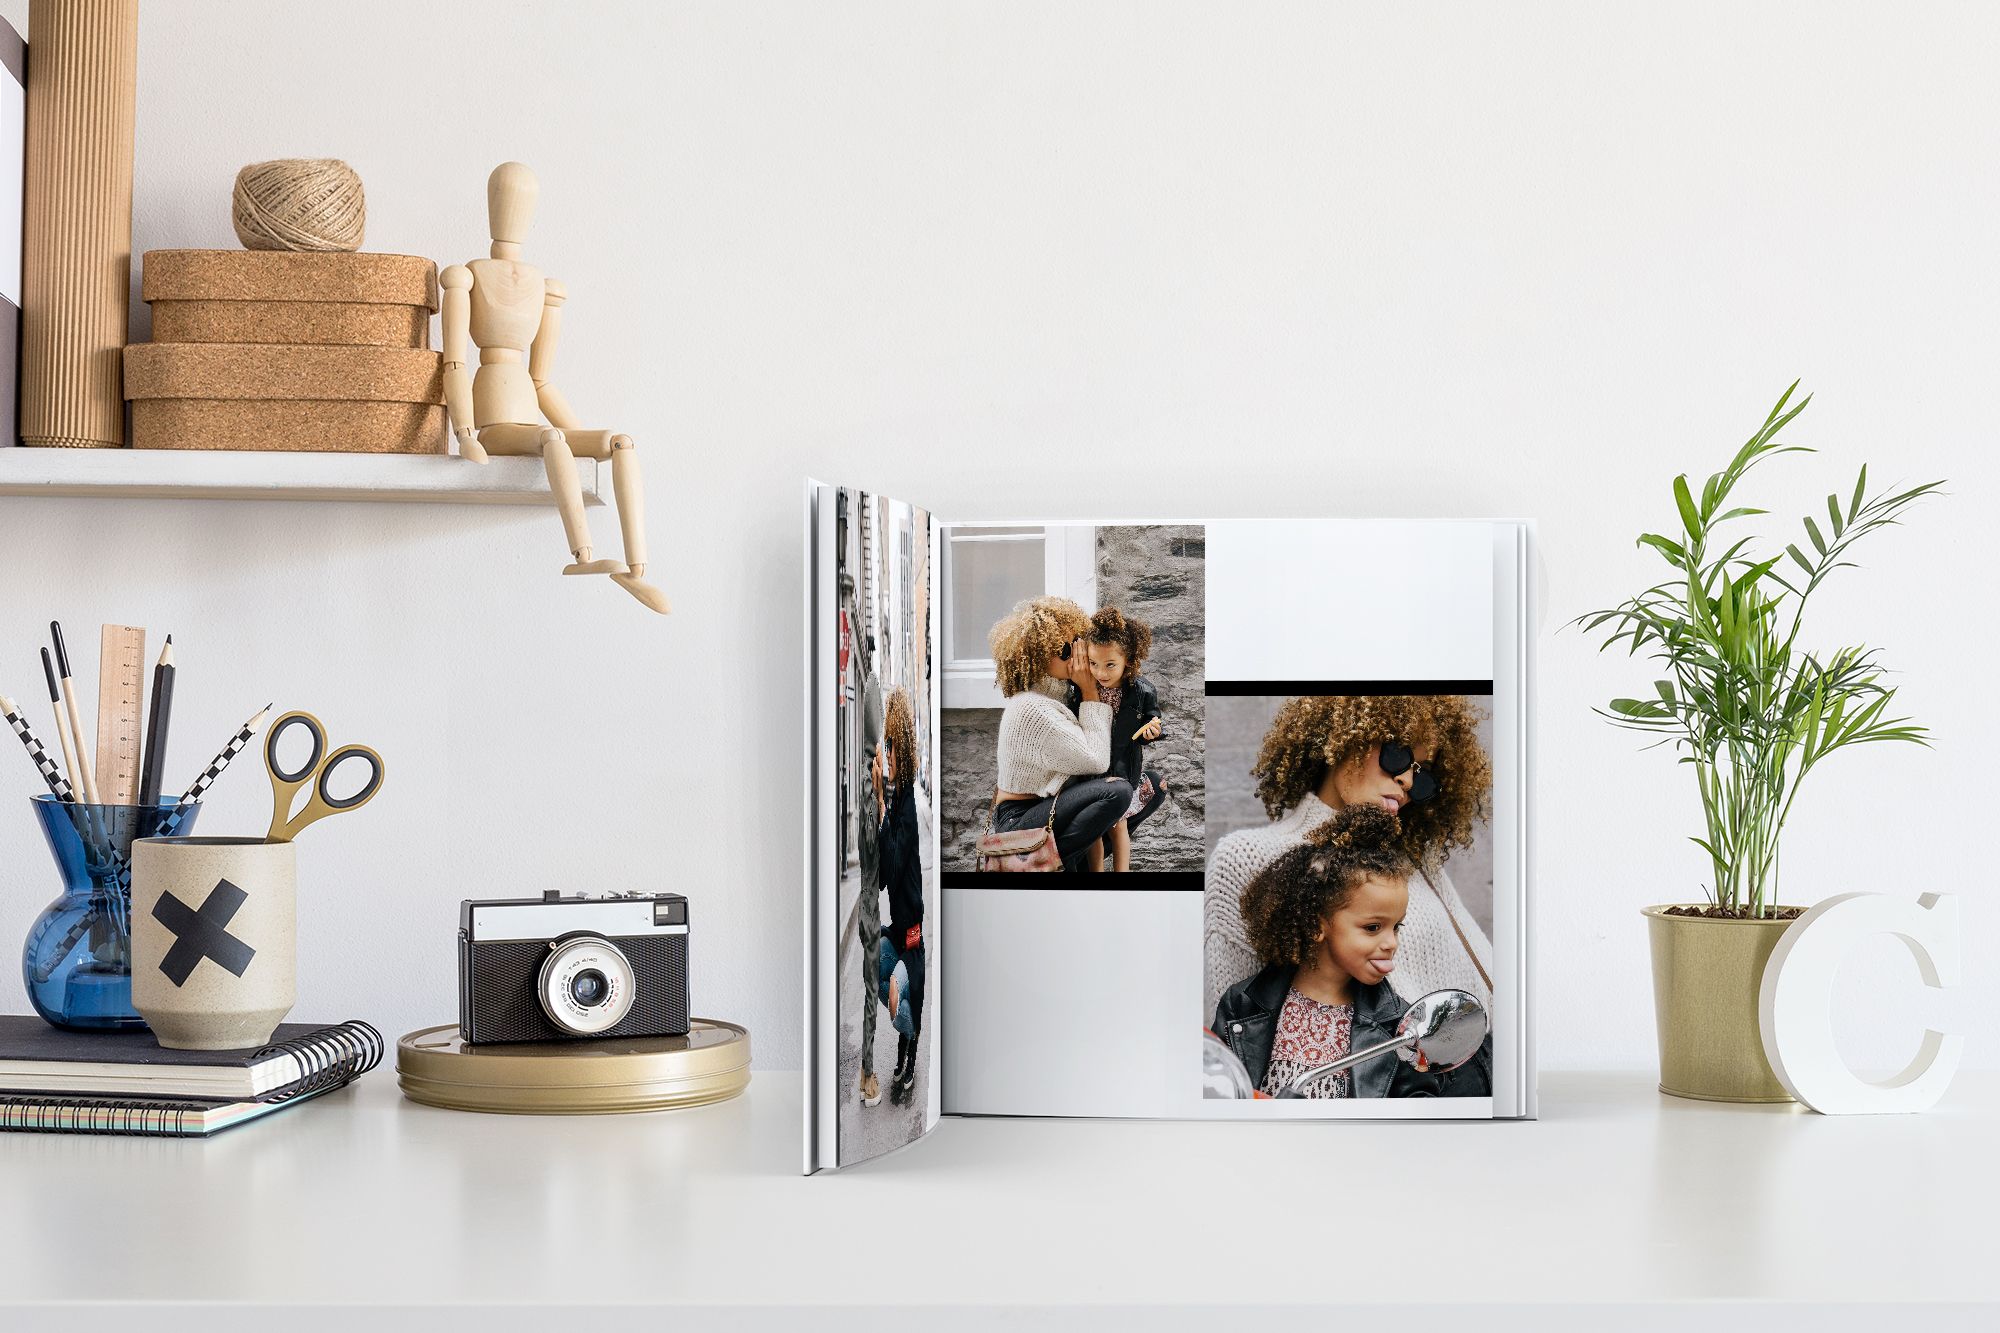 Use your own memories as a creative way to display photos